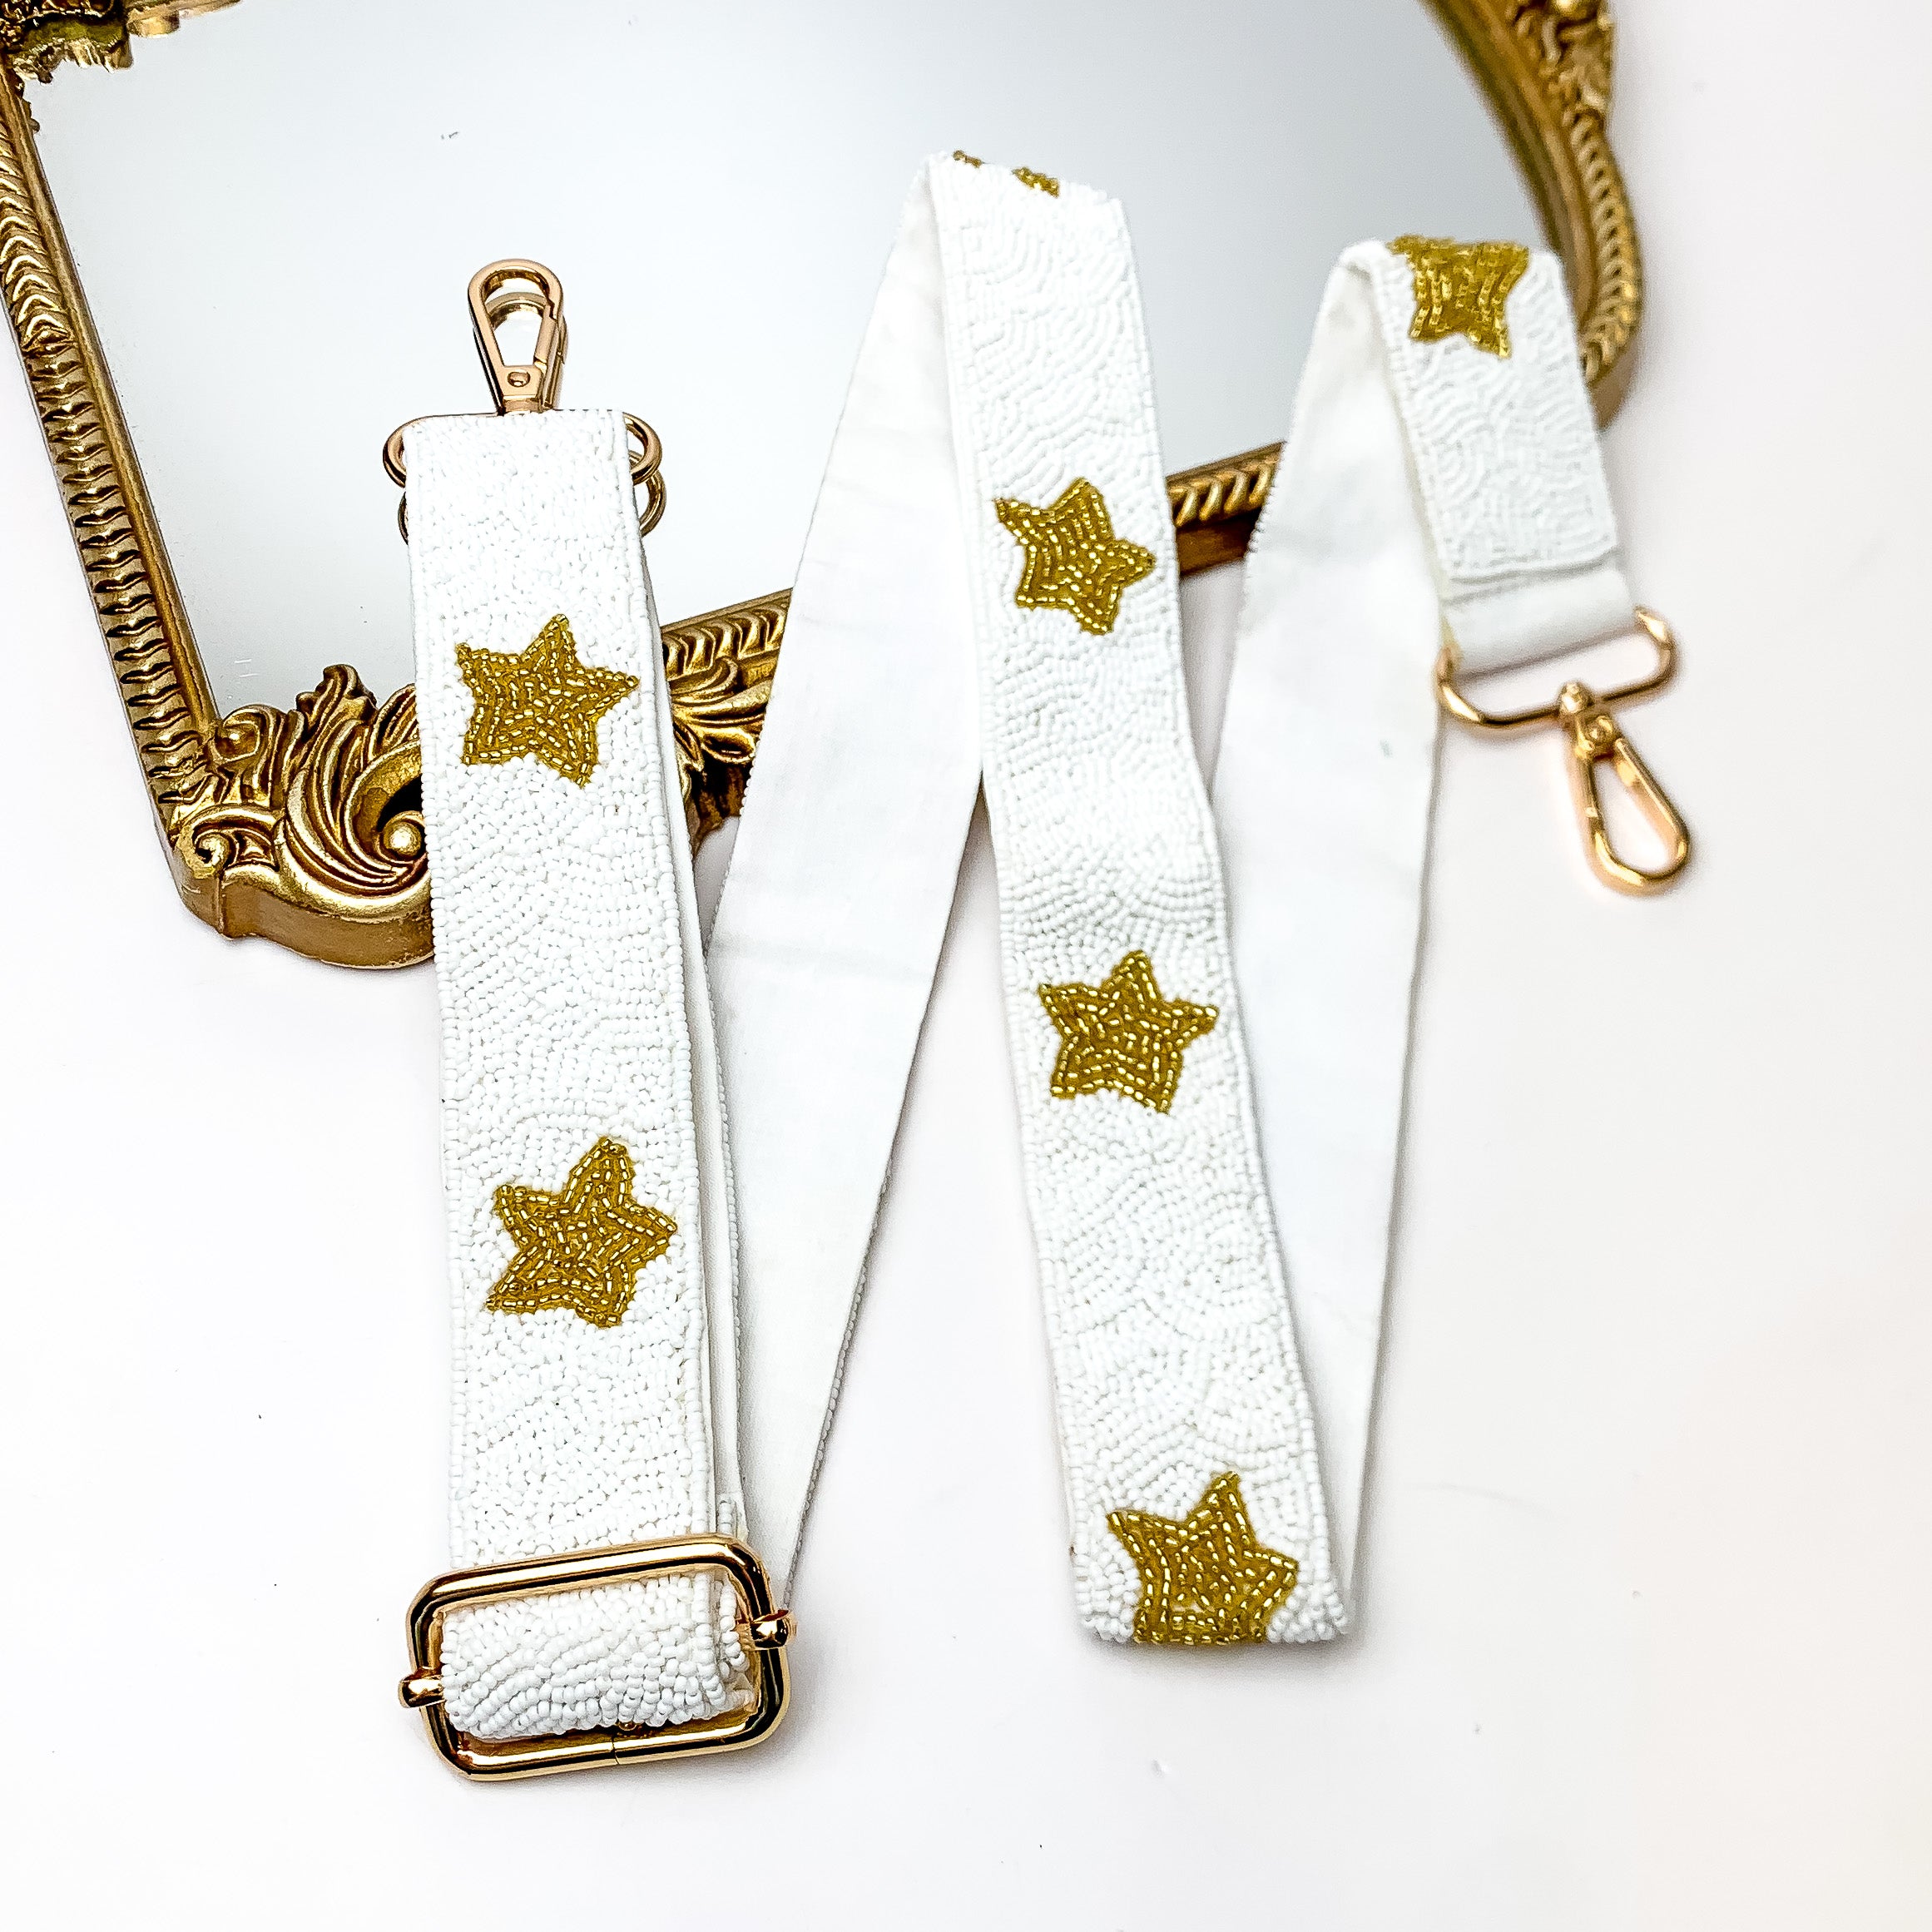 Star of the Show Beaded Adjustable Purse Strap in White and Gold. This purse strap is pictured on a white background with a gold trimmed mirror in the corner.